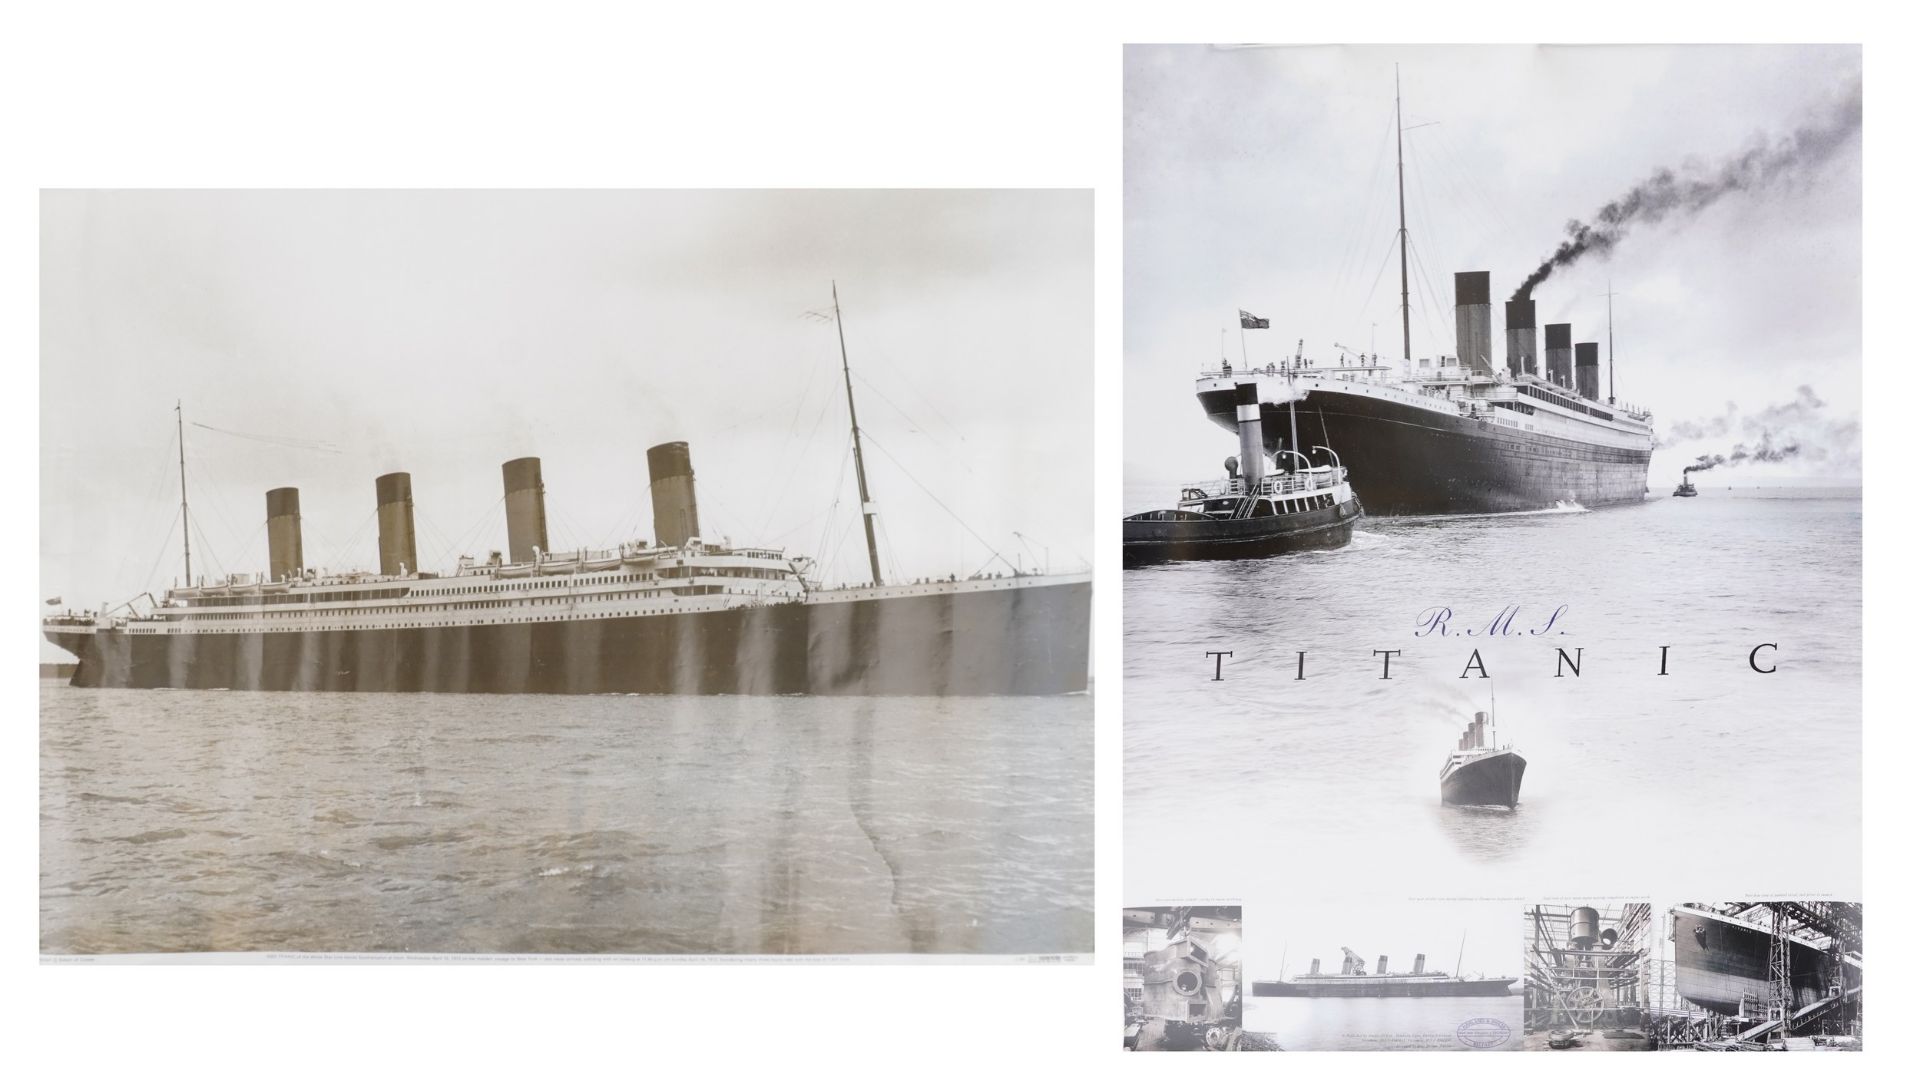 Two shipping interest RMS Titanic posters, the largest 86cm x 63.5cm : For further information on